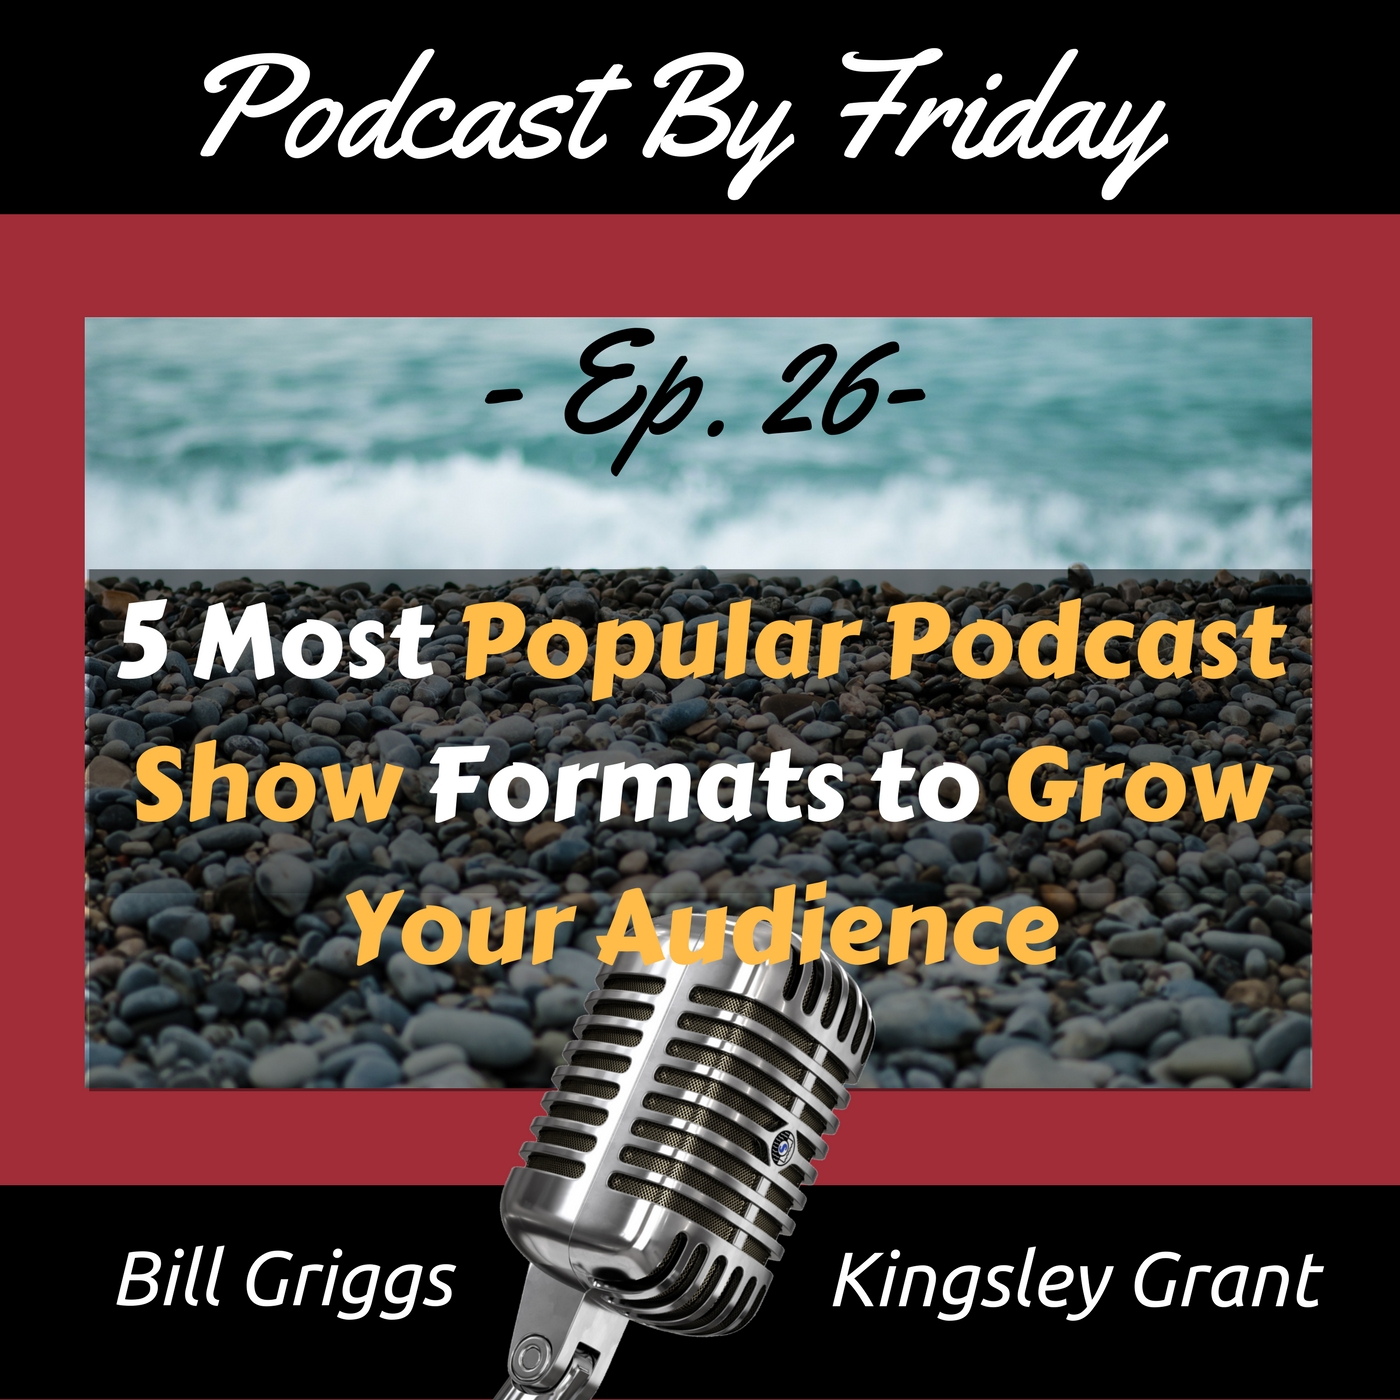 podcast-show-formats-to-grow-your-audience-bill-griggs-kingsley-grant